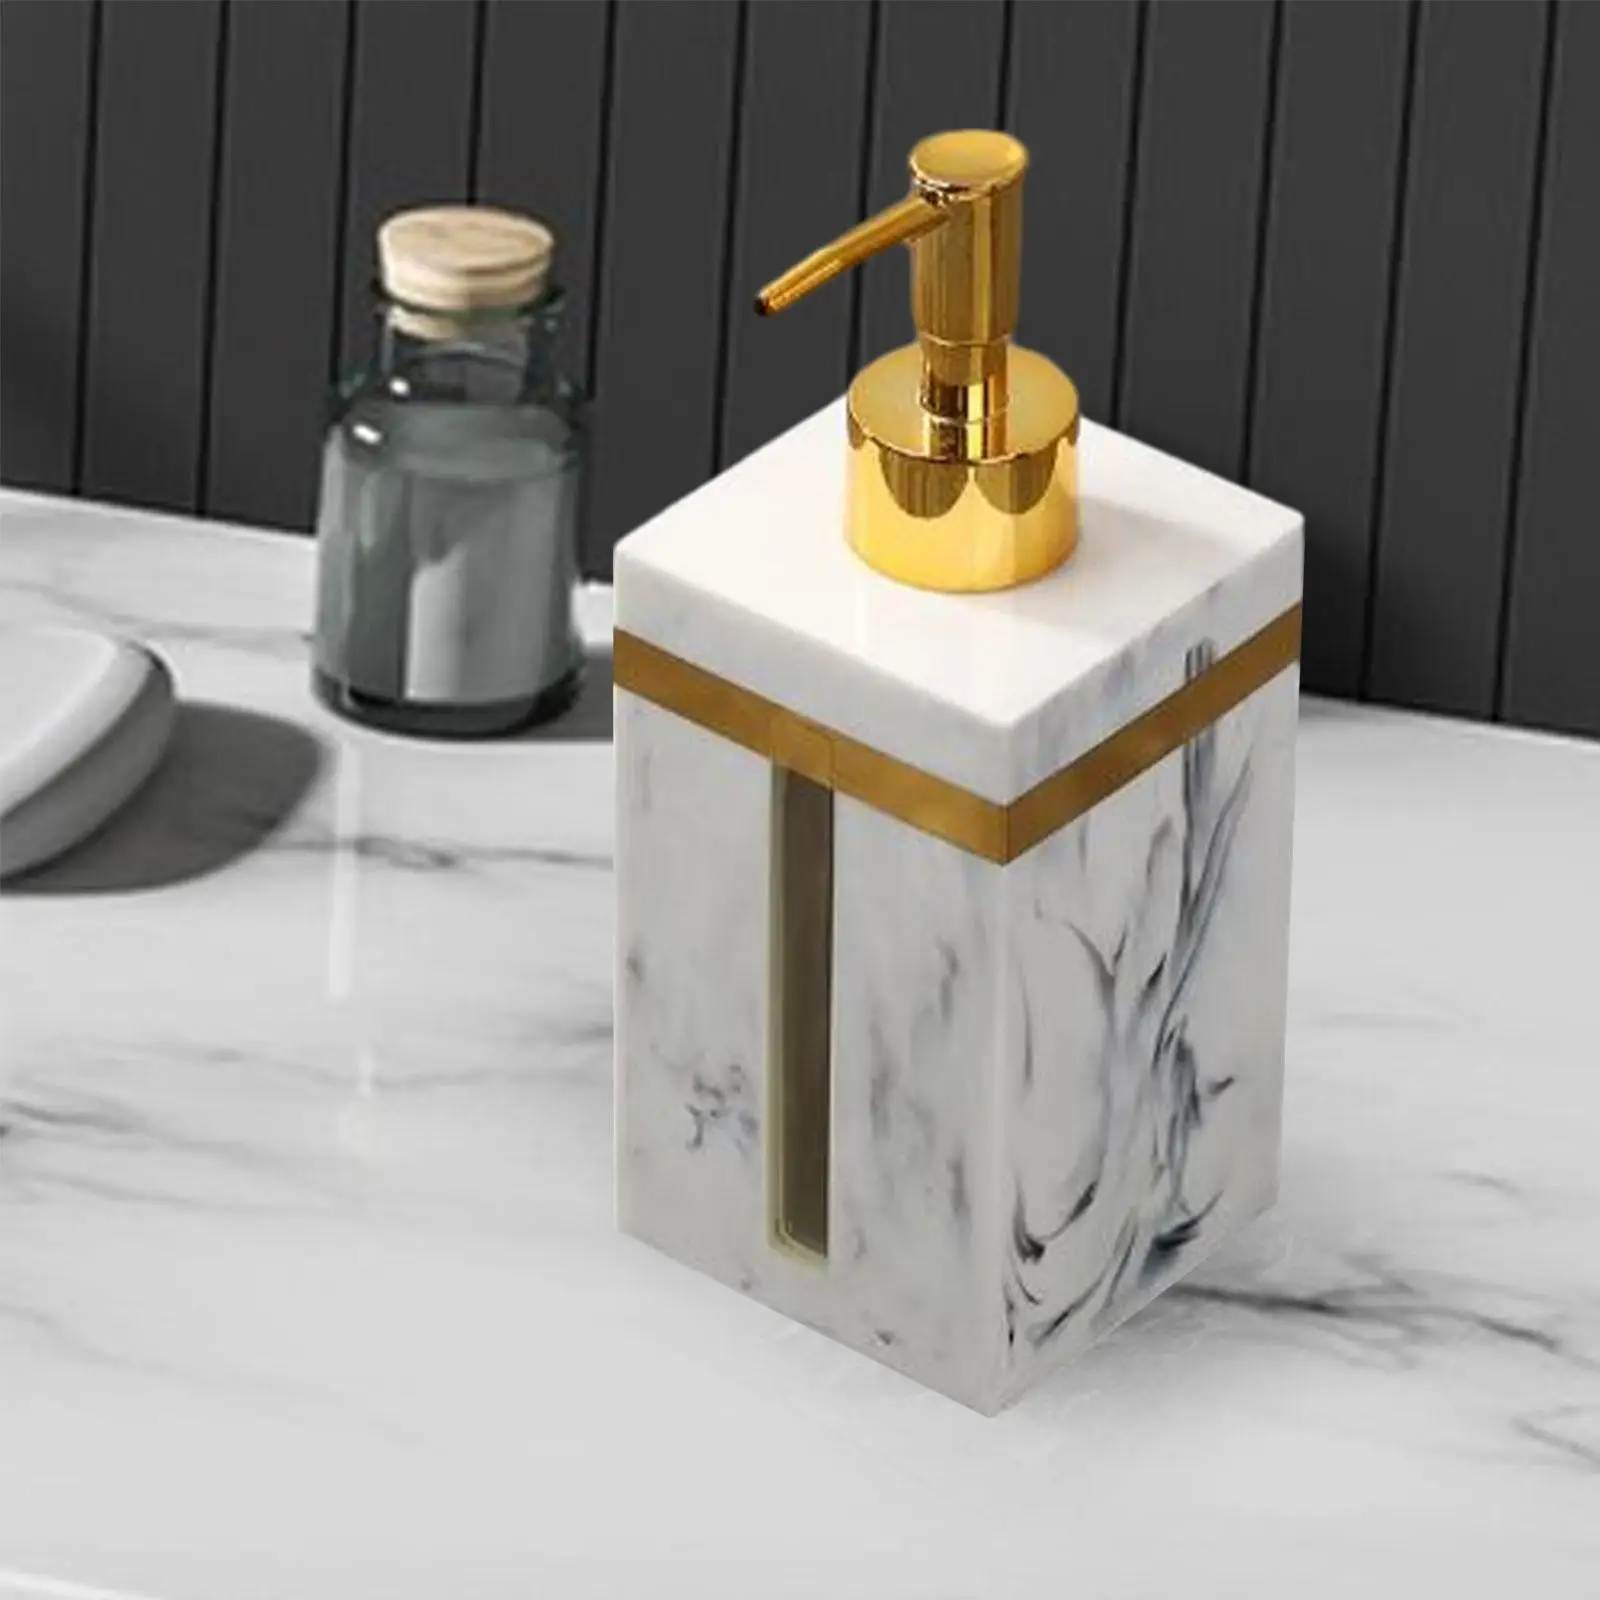 Marble Texture Manual Soap Dispenser Resin Empty Sturdy Hand Soap Liquid Dispenser for Laundry Room Kitchen Home Bathroom